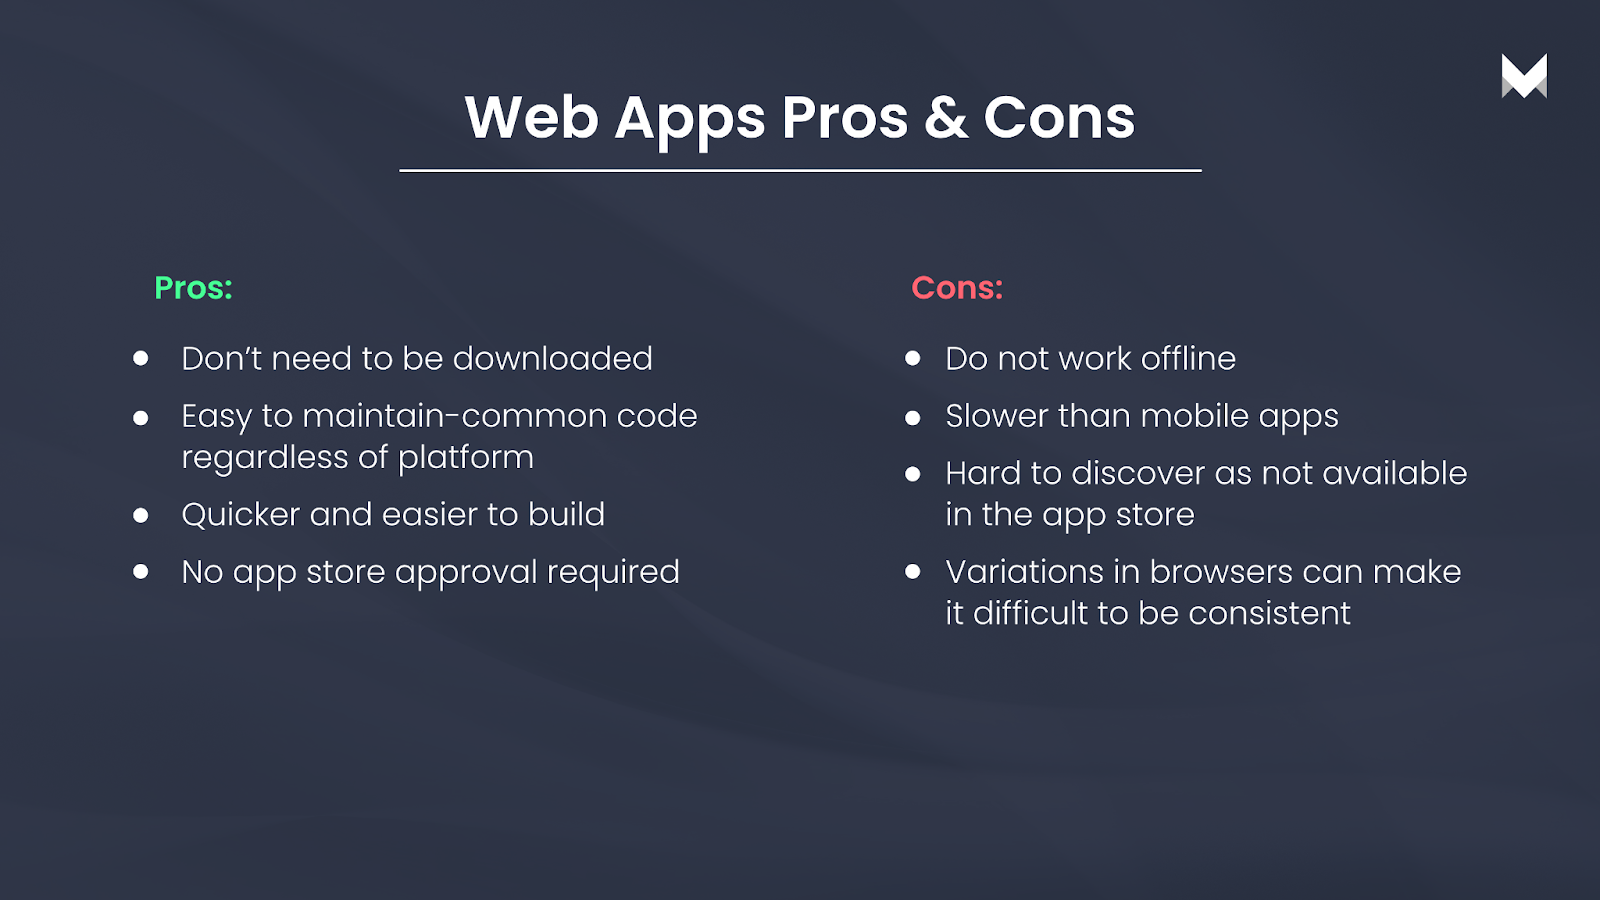 web apps pros & cons